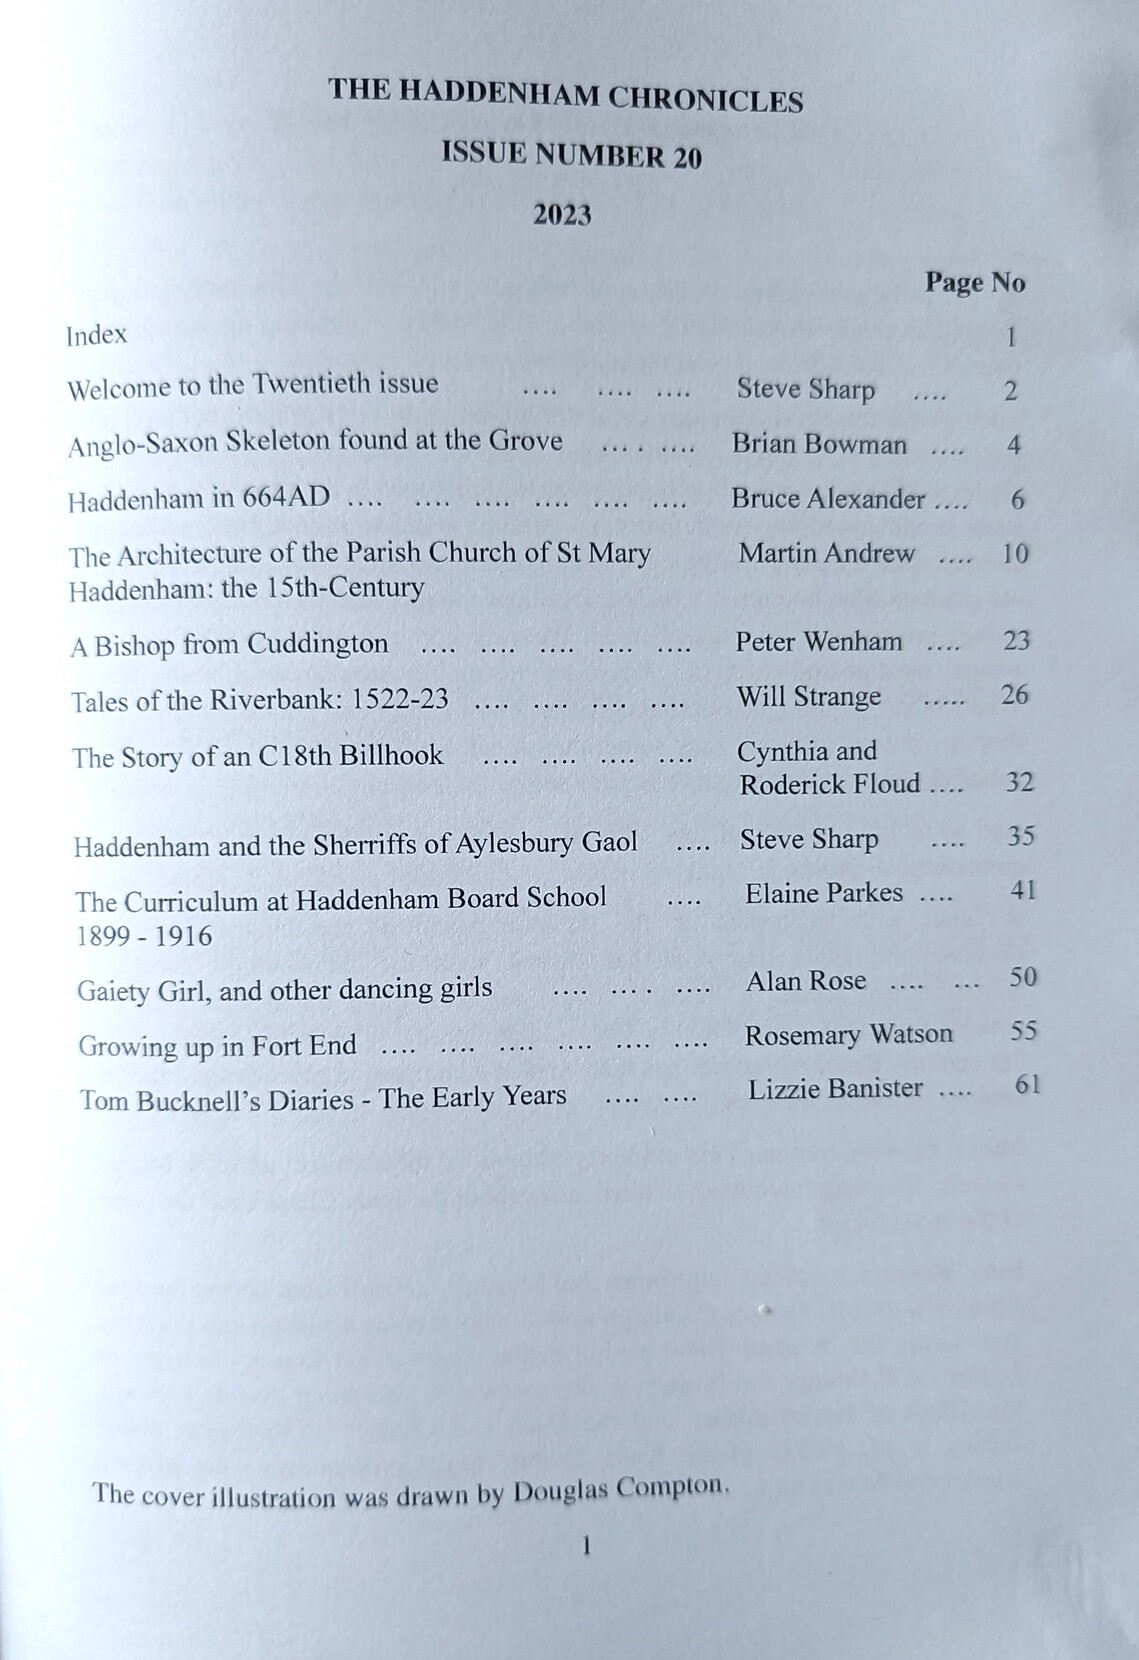 Chronicles 20 contents page